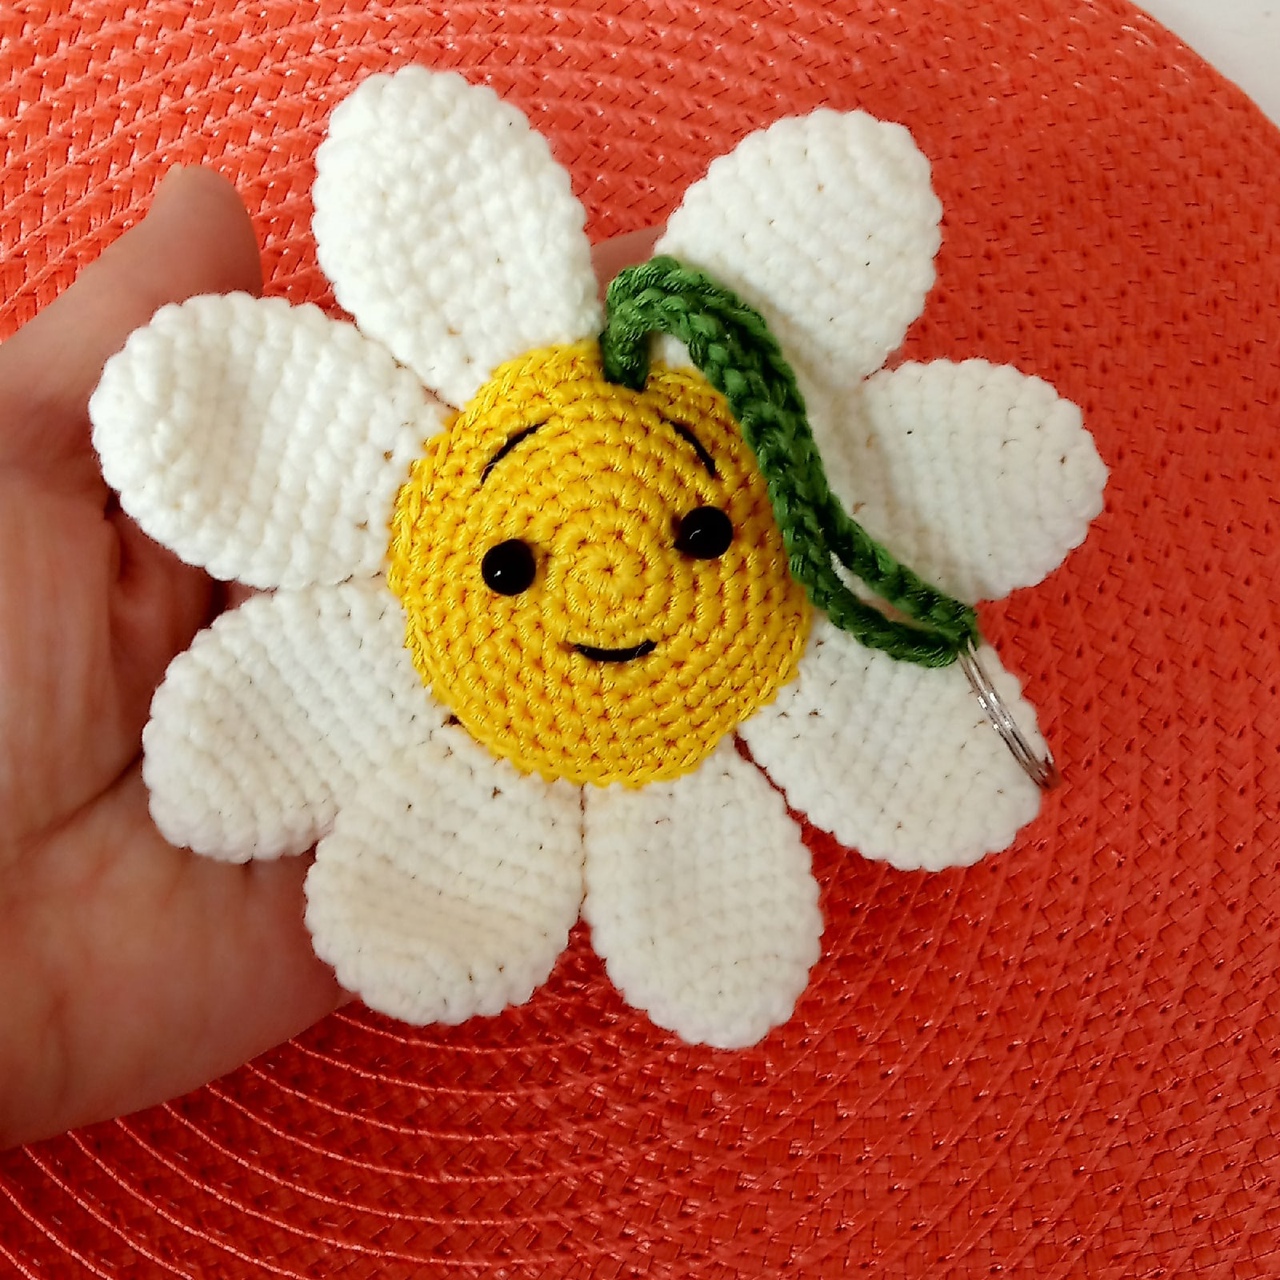 Daisy car accessories. Hanging car mirrors amulet. Gift for her. -  Crealandia